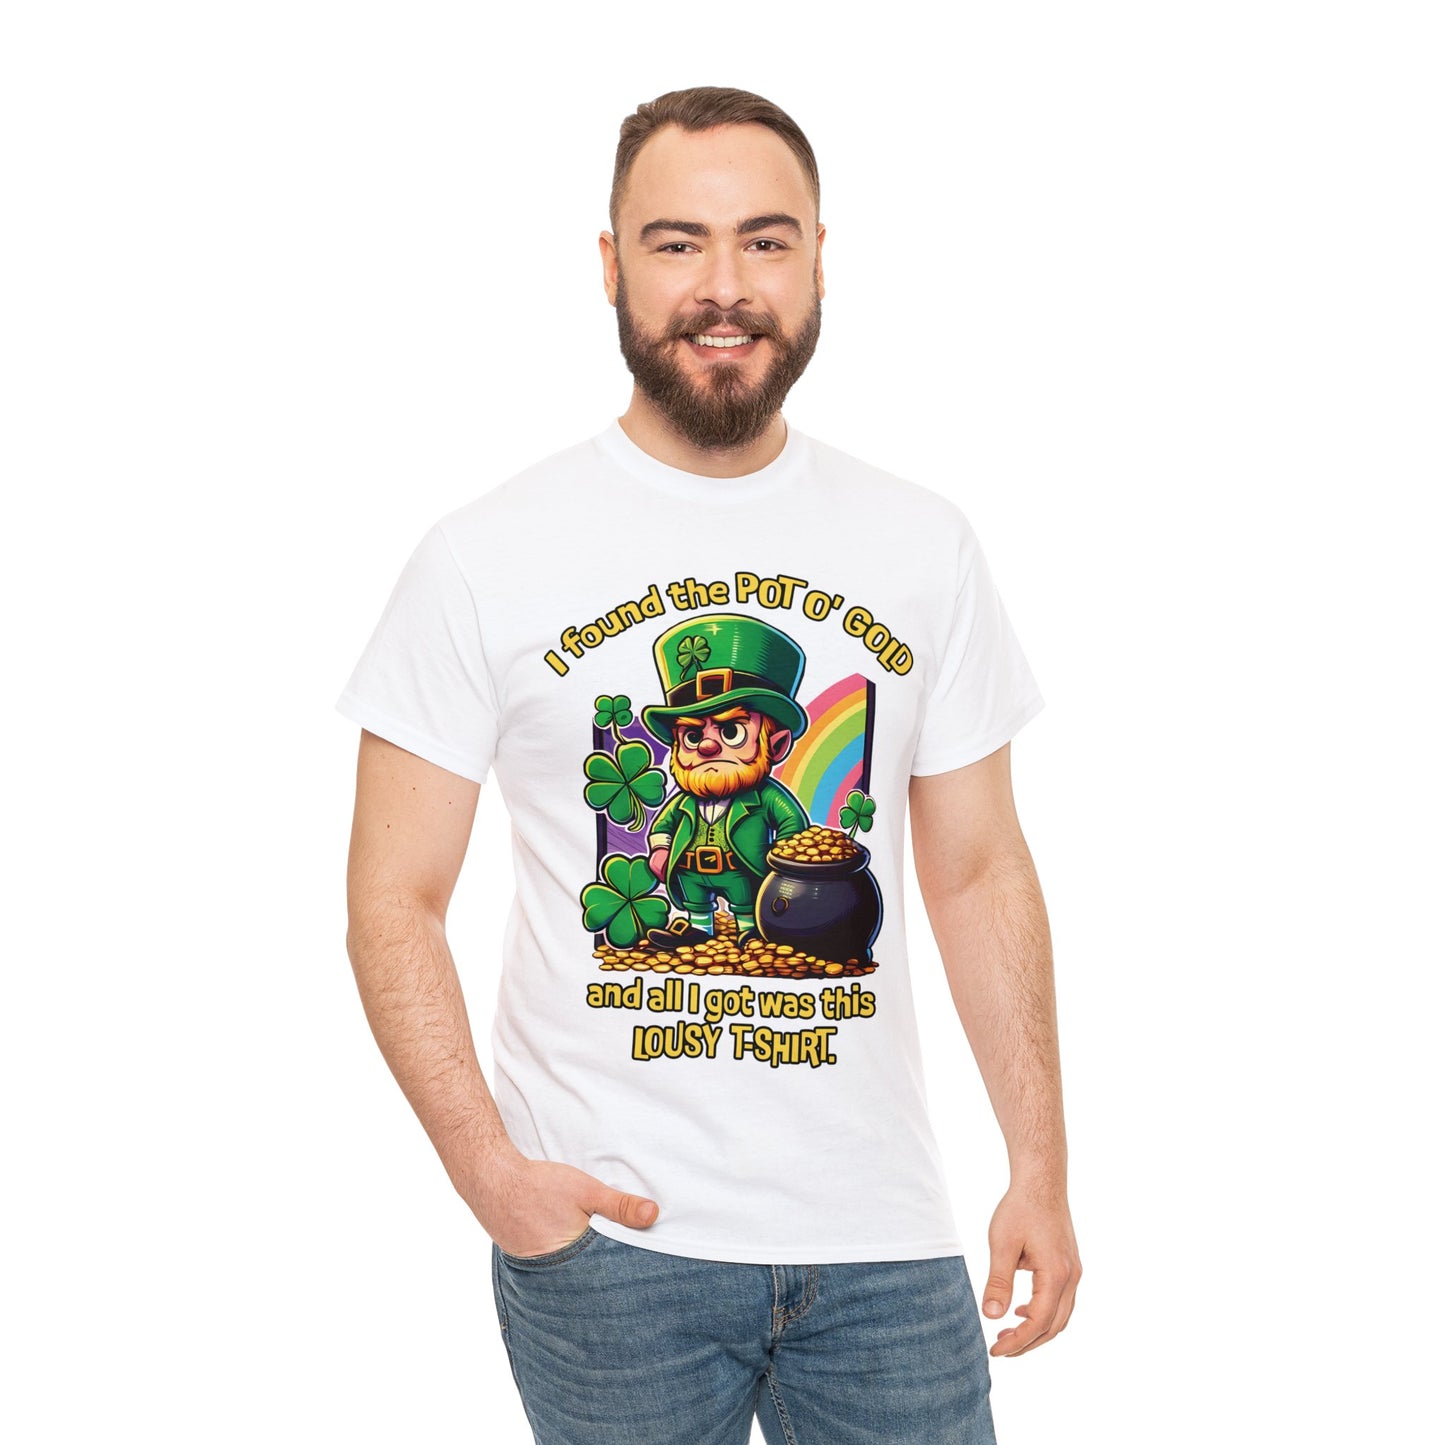 Funny St. Patrick's Day T-Shirt Pot of Gold All I Got Was This Lousy Tee Shirt